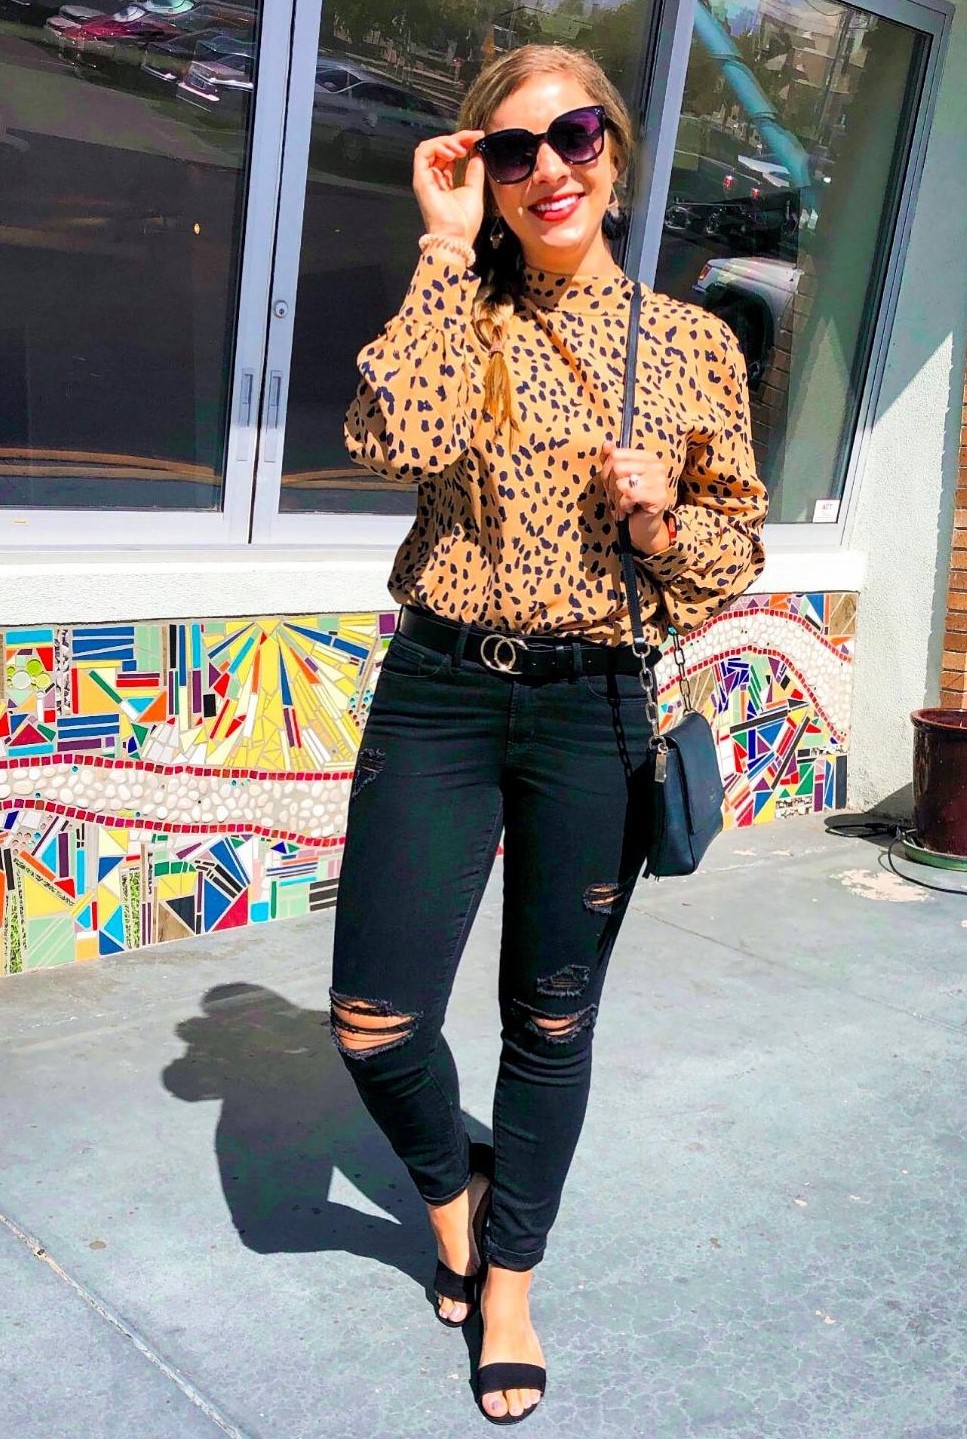 Leopard Print Top Outfit with Jeans